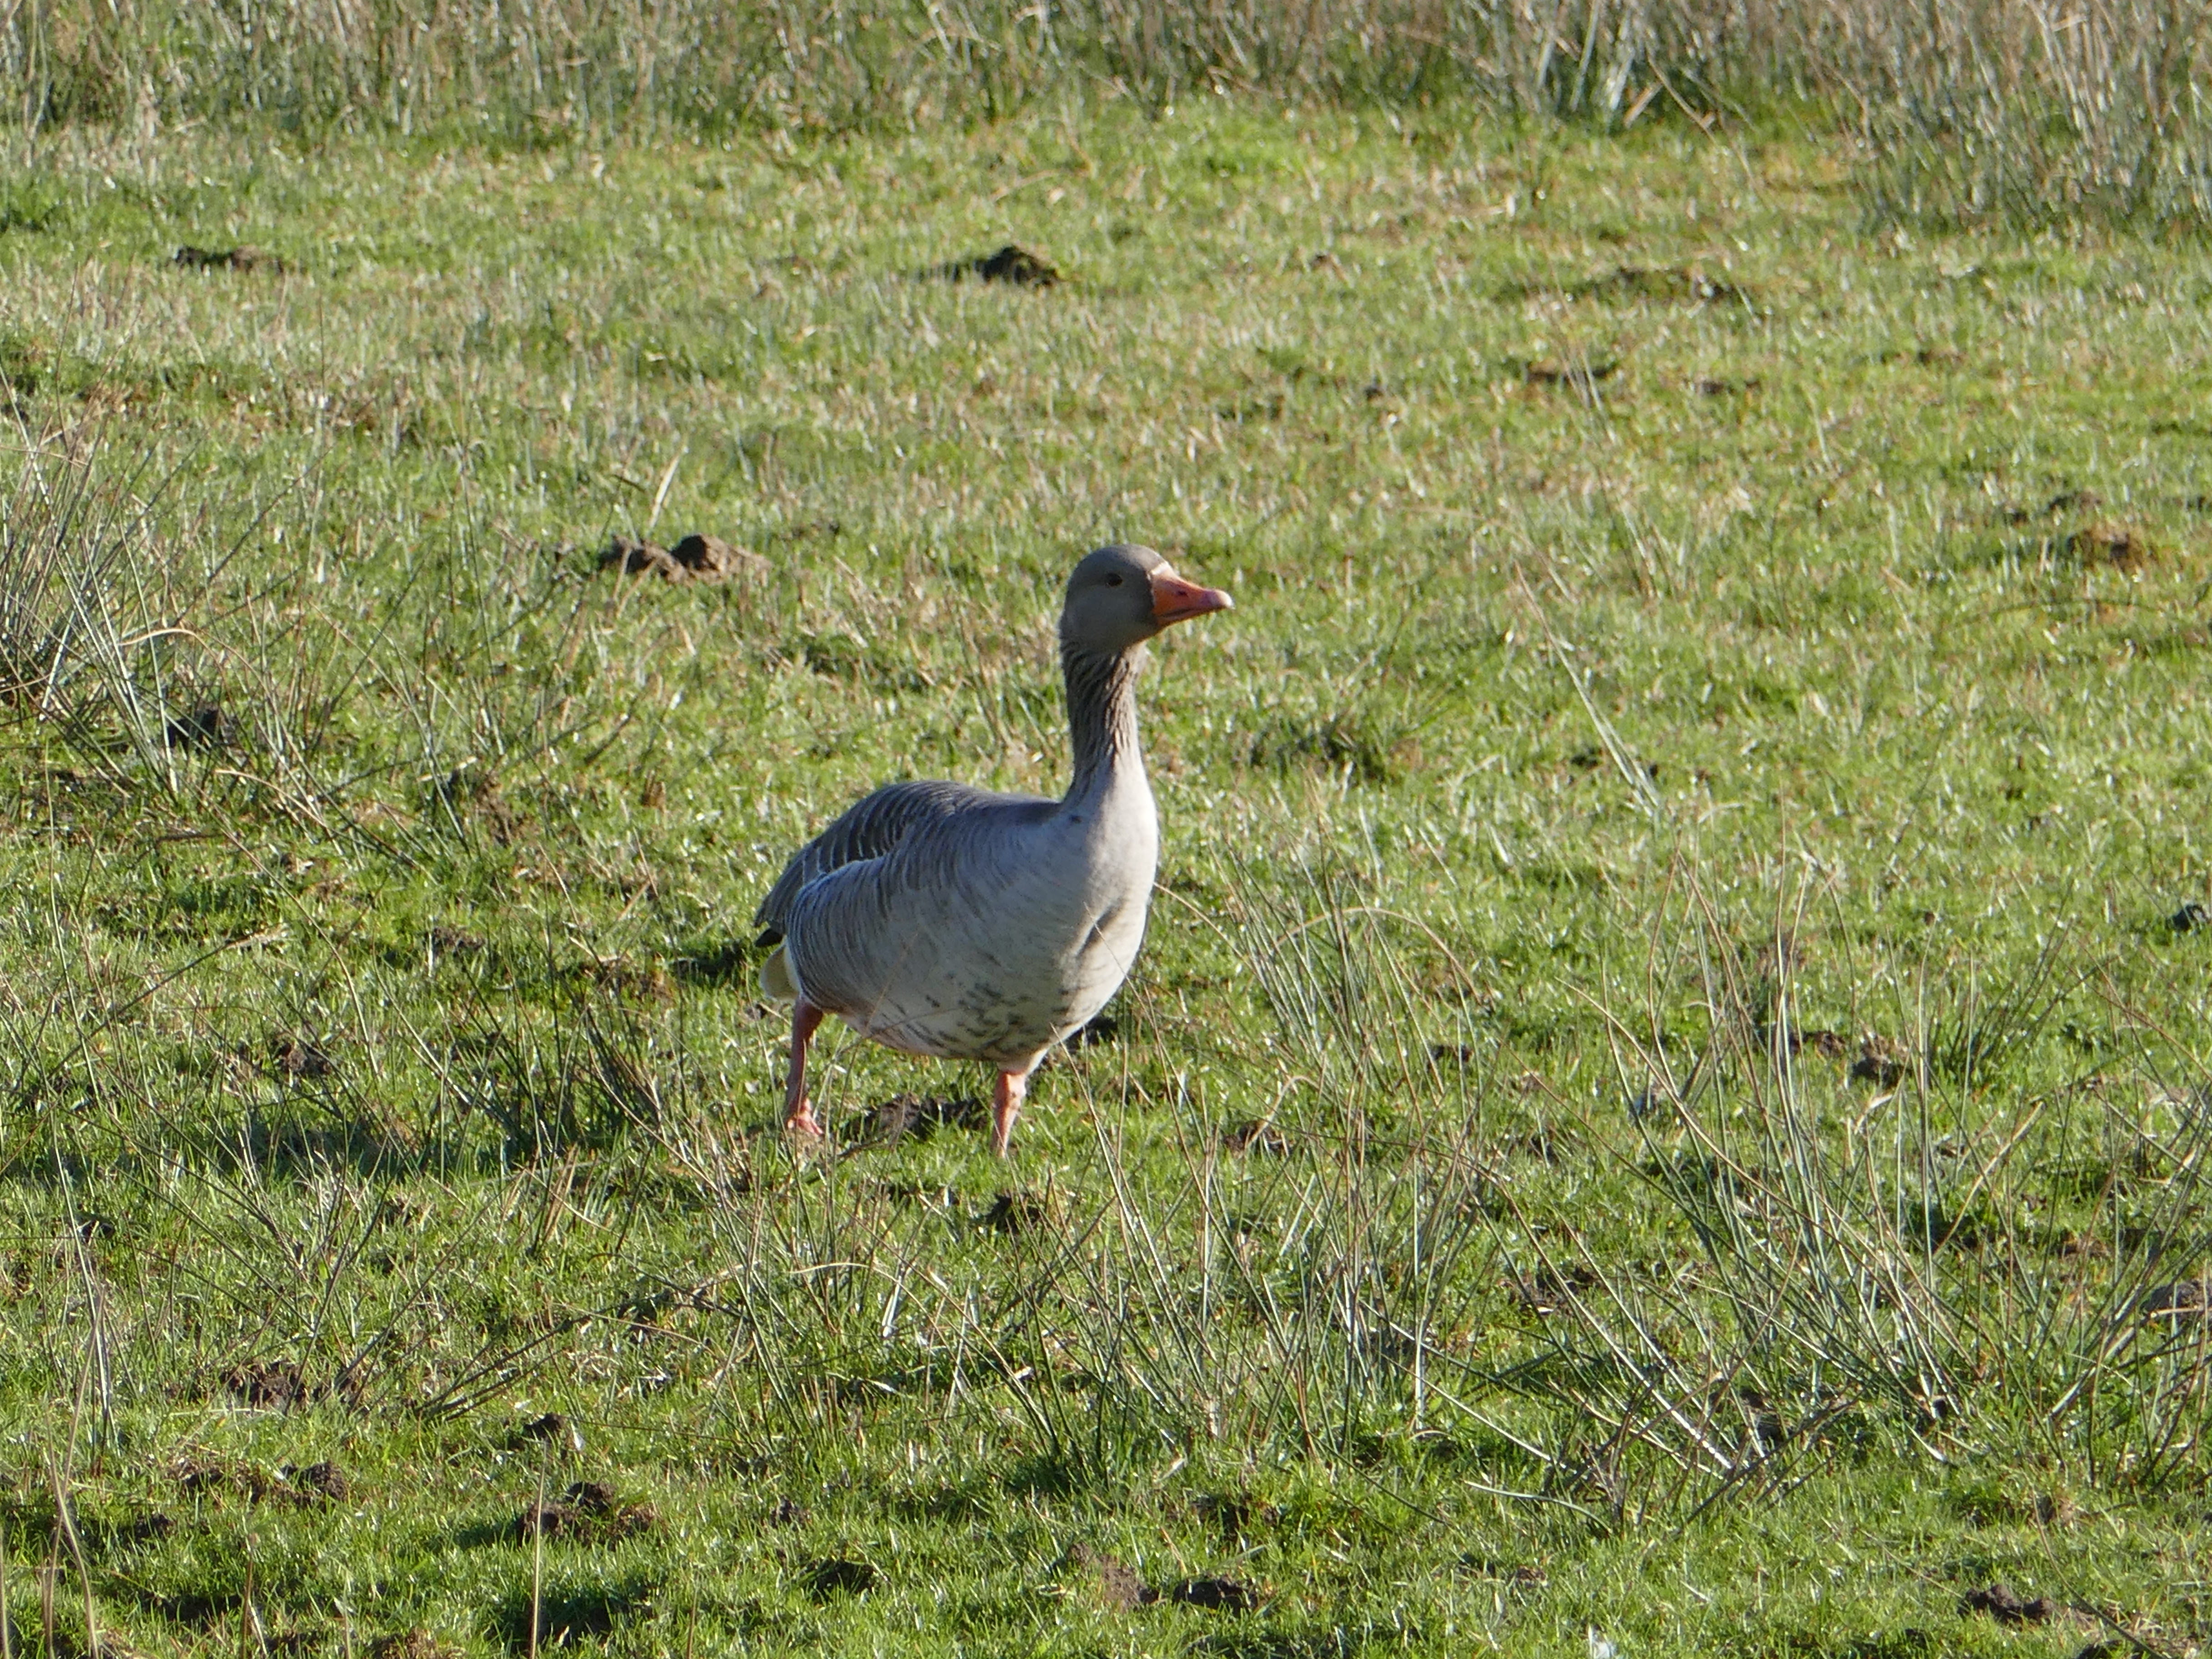 Greylag goose looking into the camera.